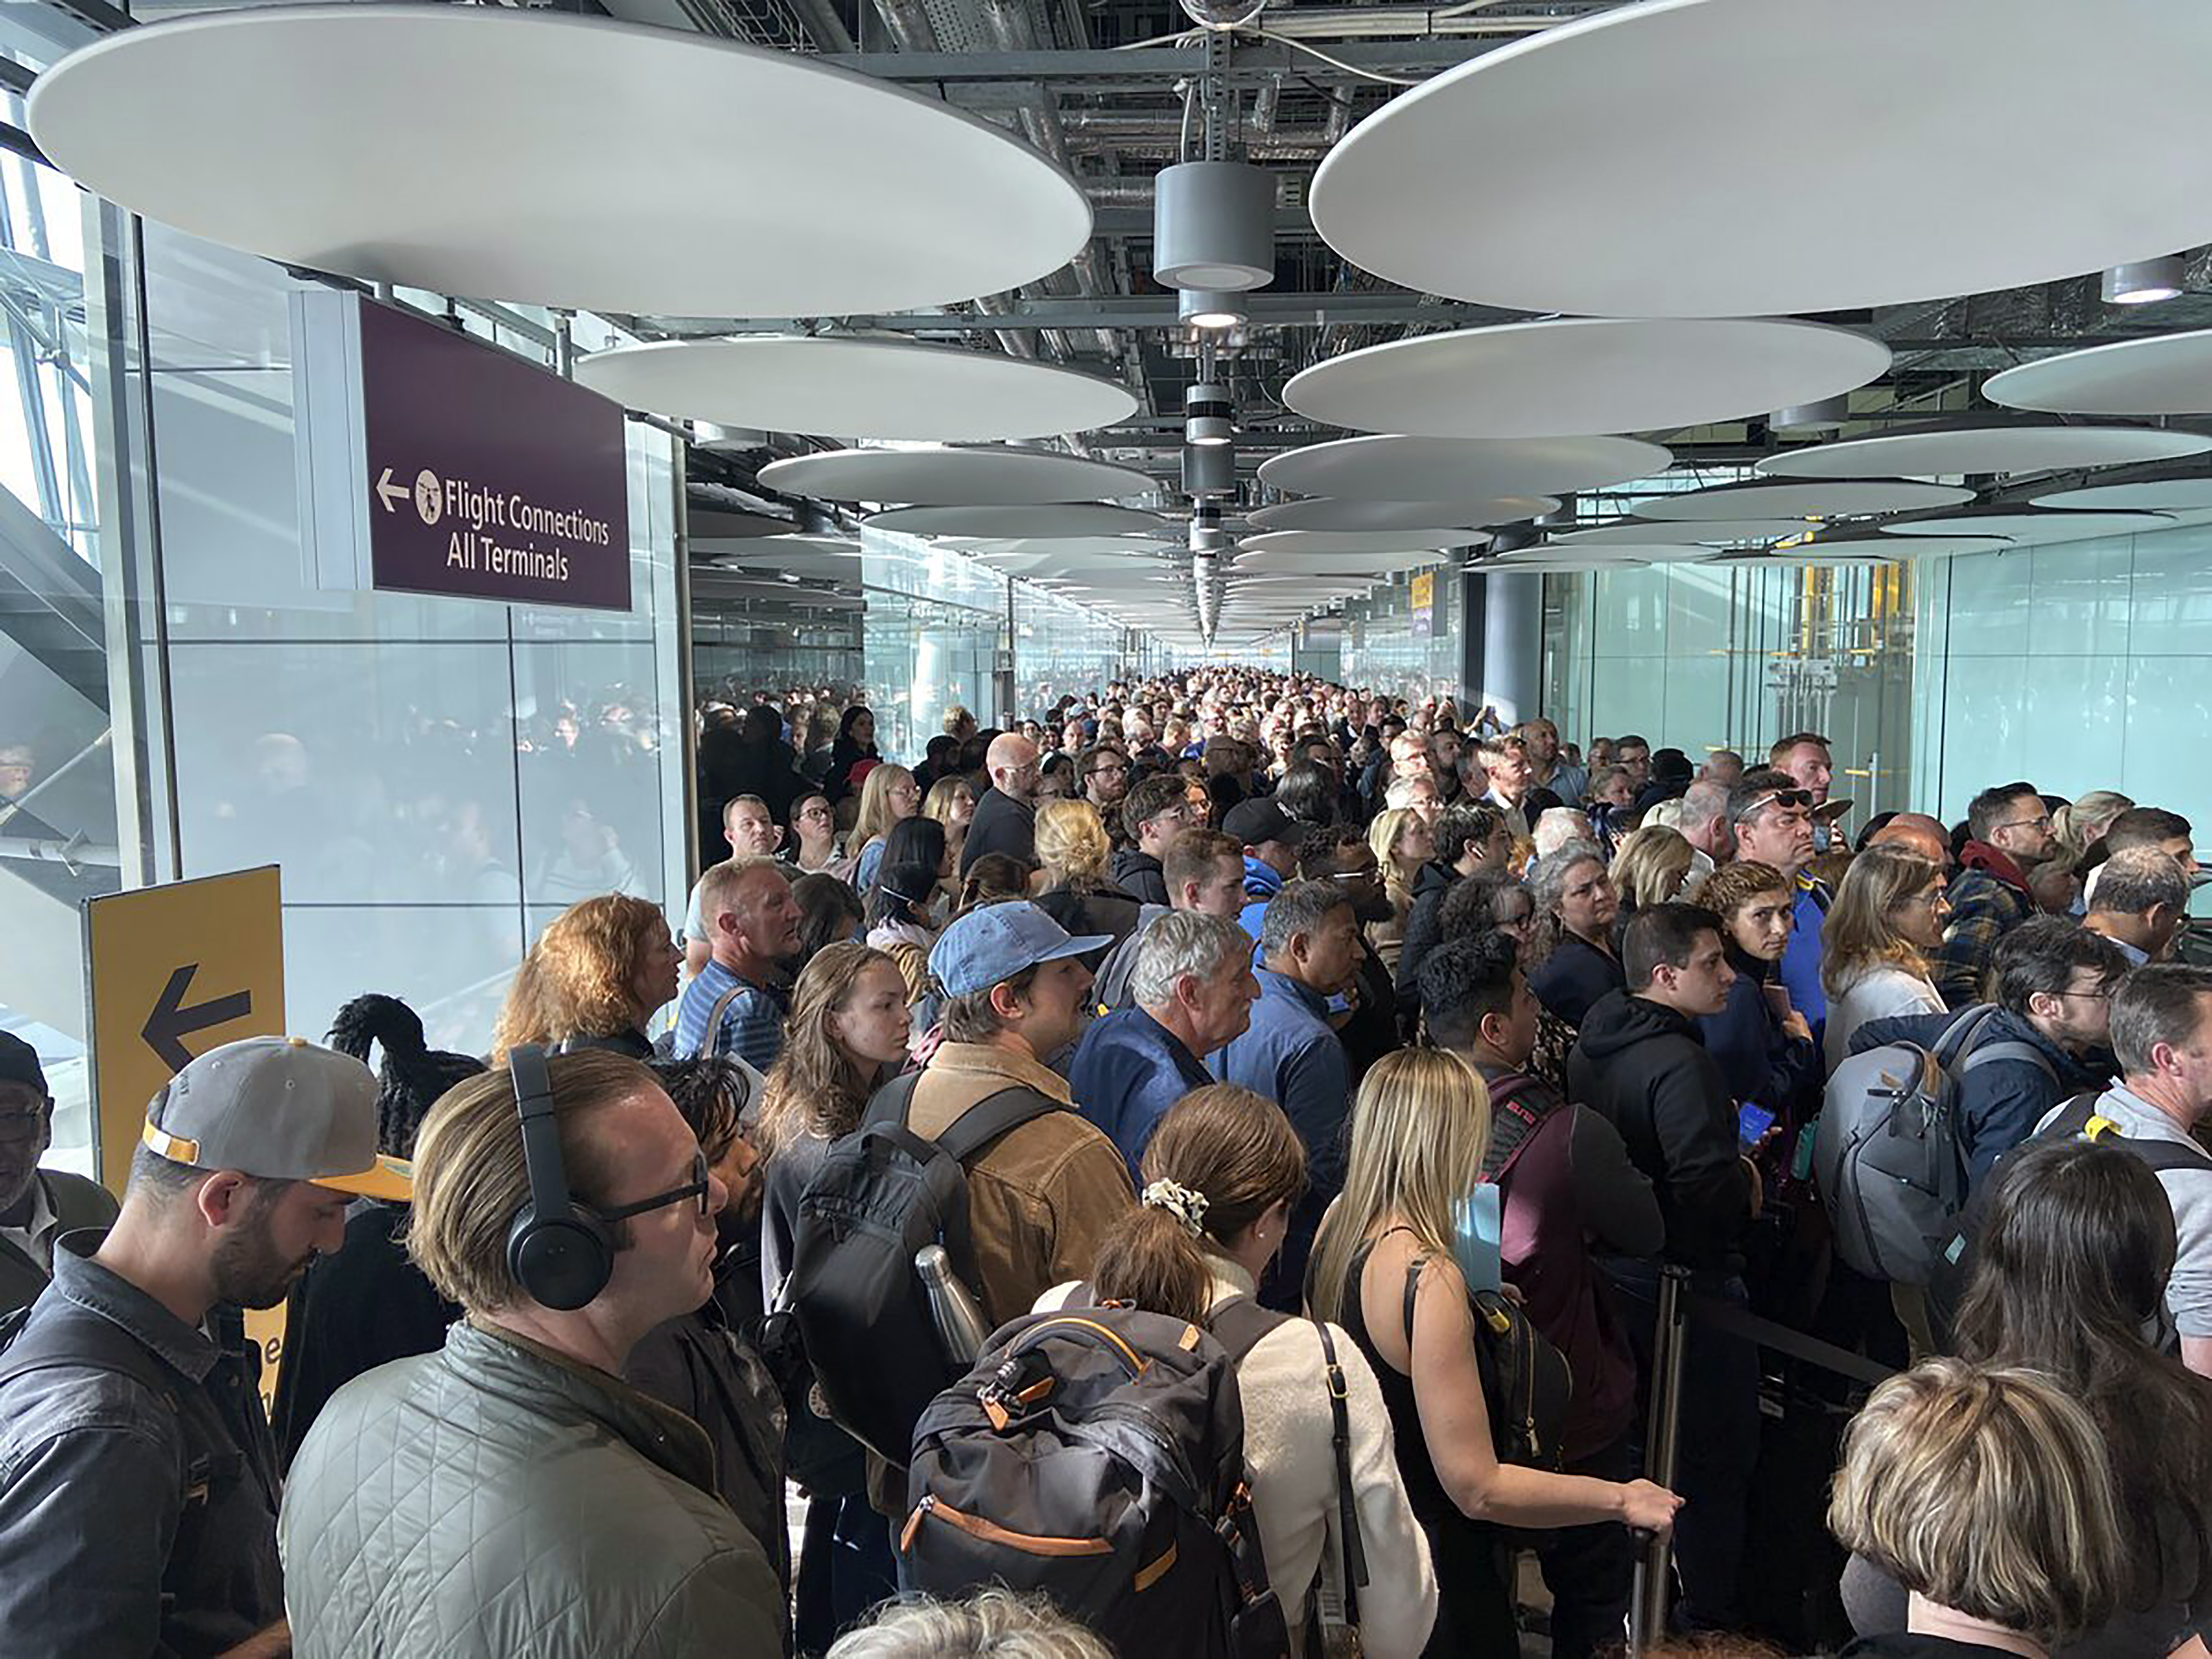 Travellers delayed at U.K. airports due to ‘nationwide border system issue’